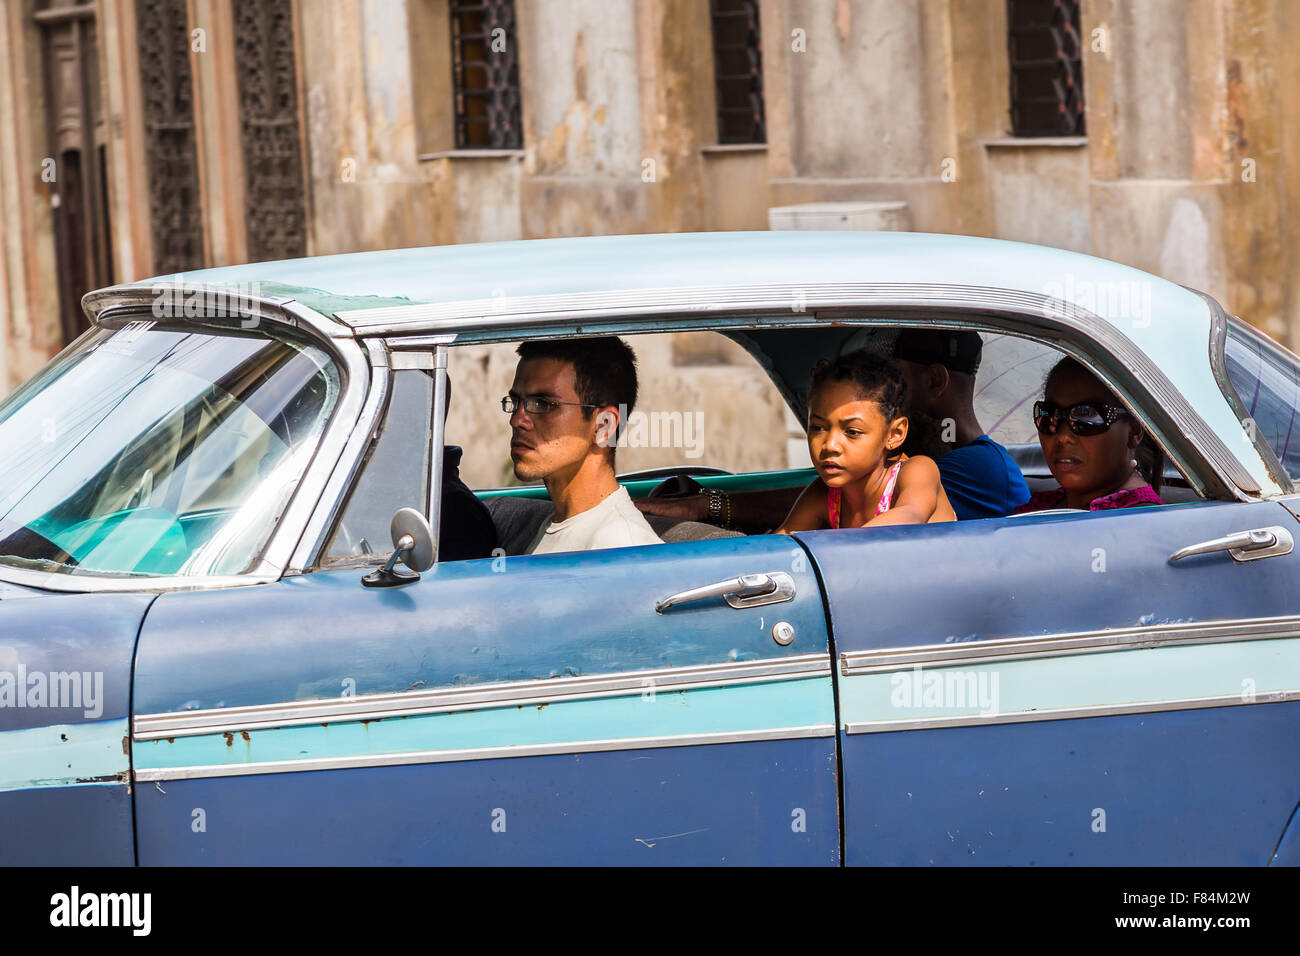 Locals sun drenched in an old timer on the streets of Havana. Stock Photo